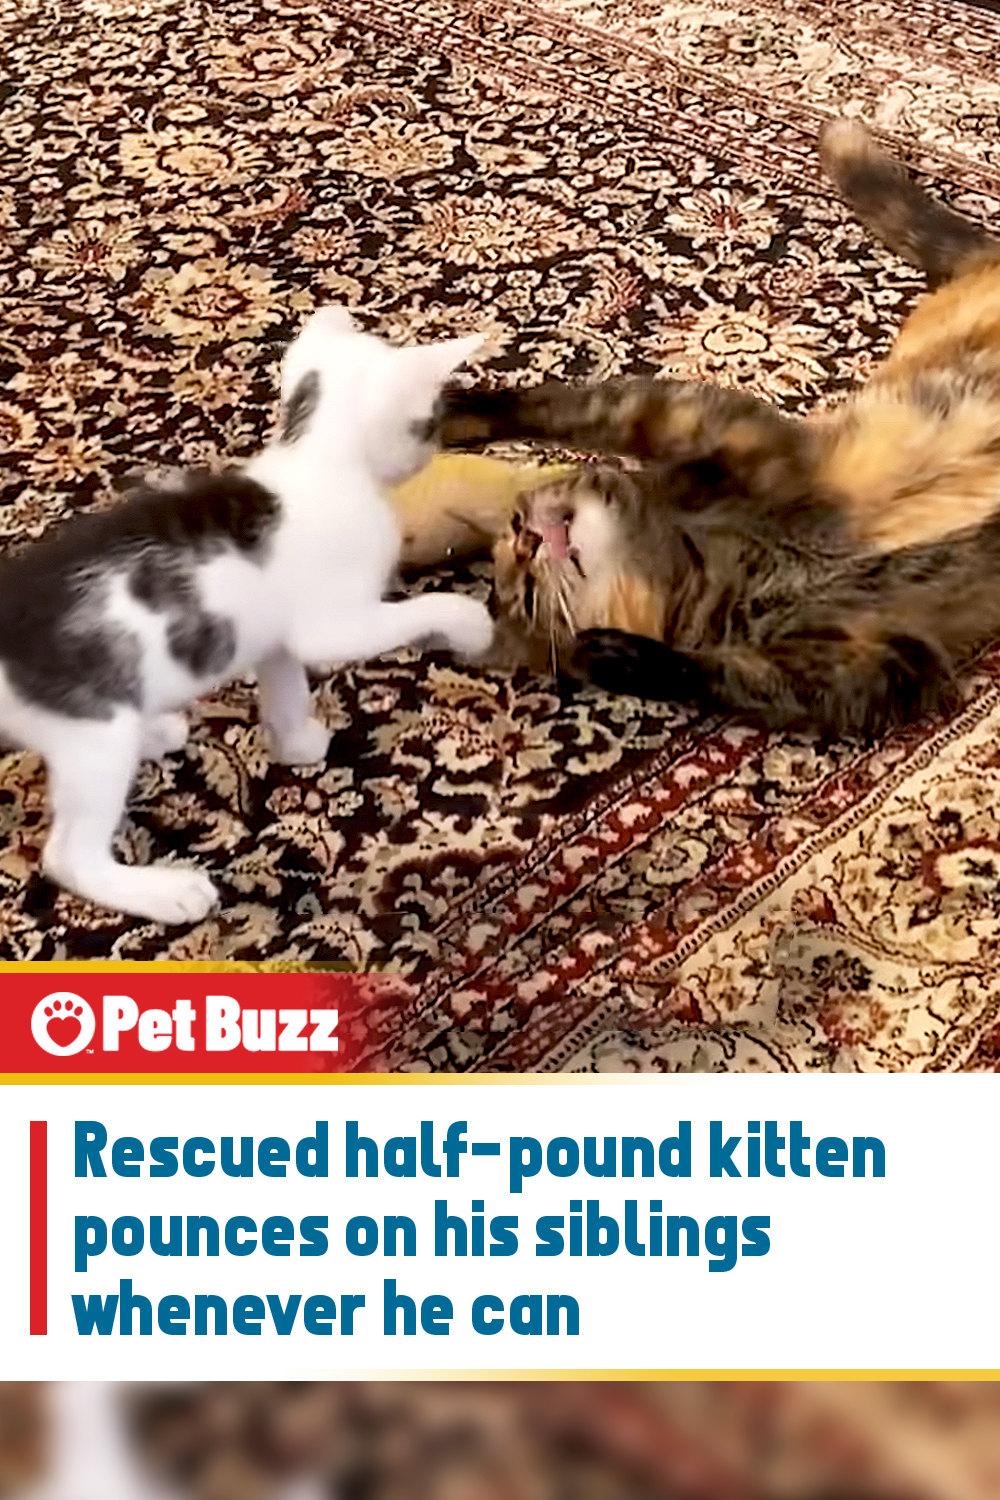 Rescued half-pound kitten pounces on his siblings whenever he can